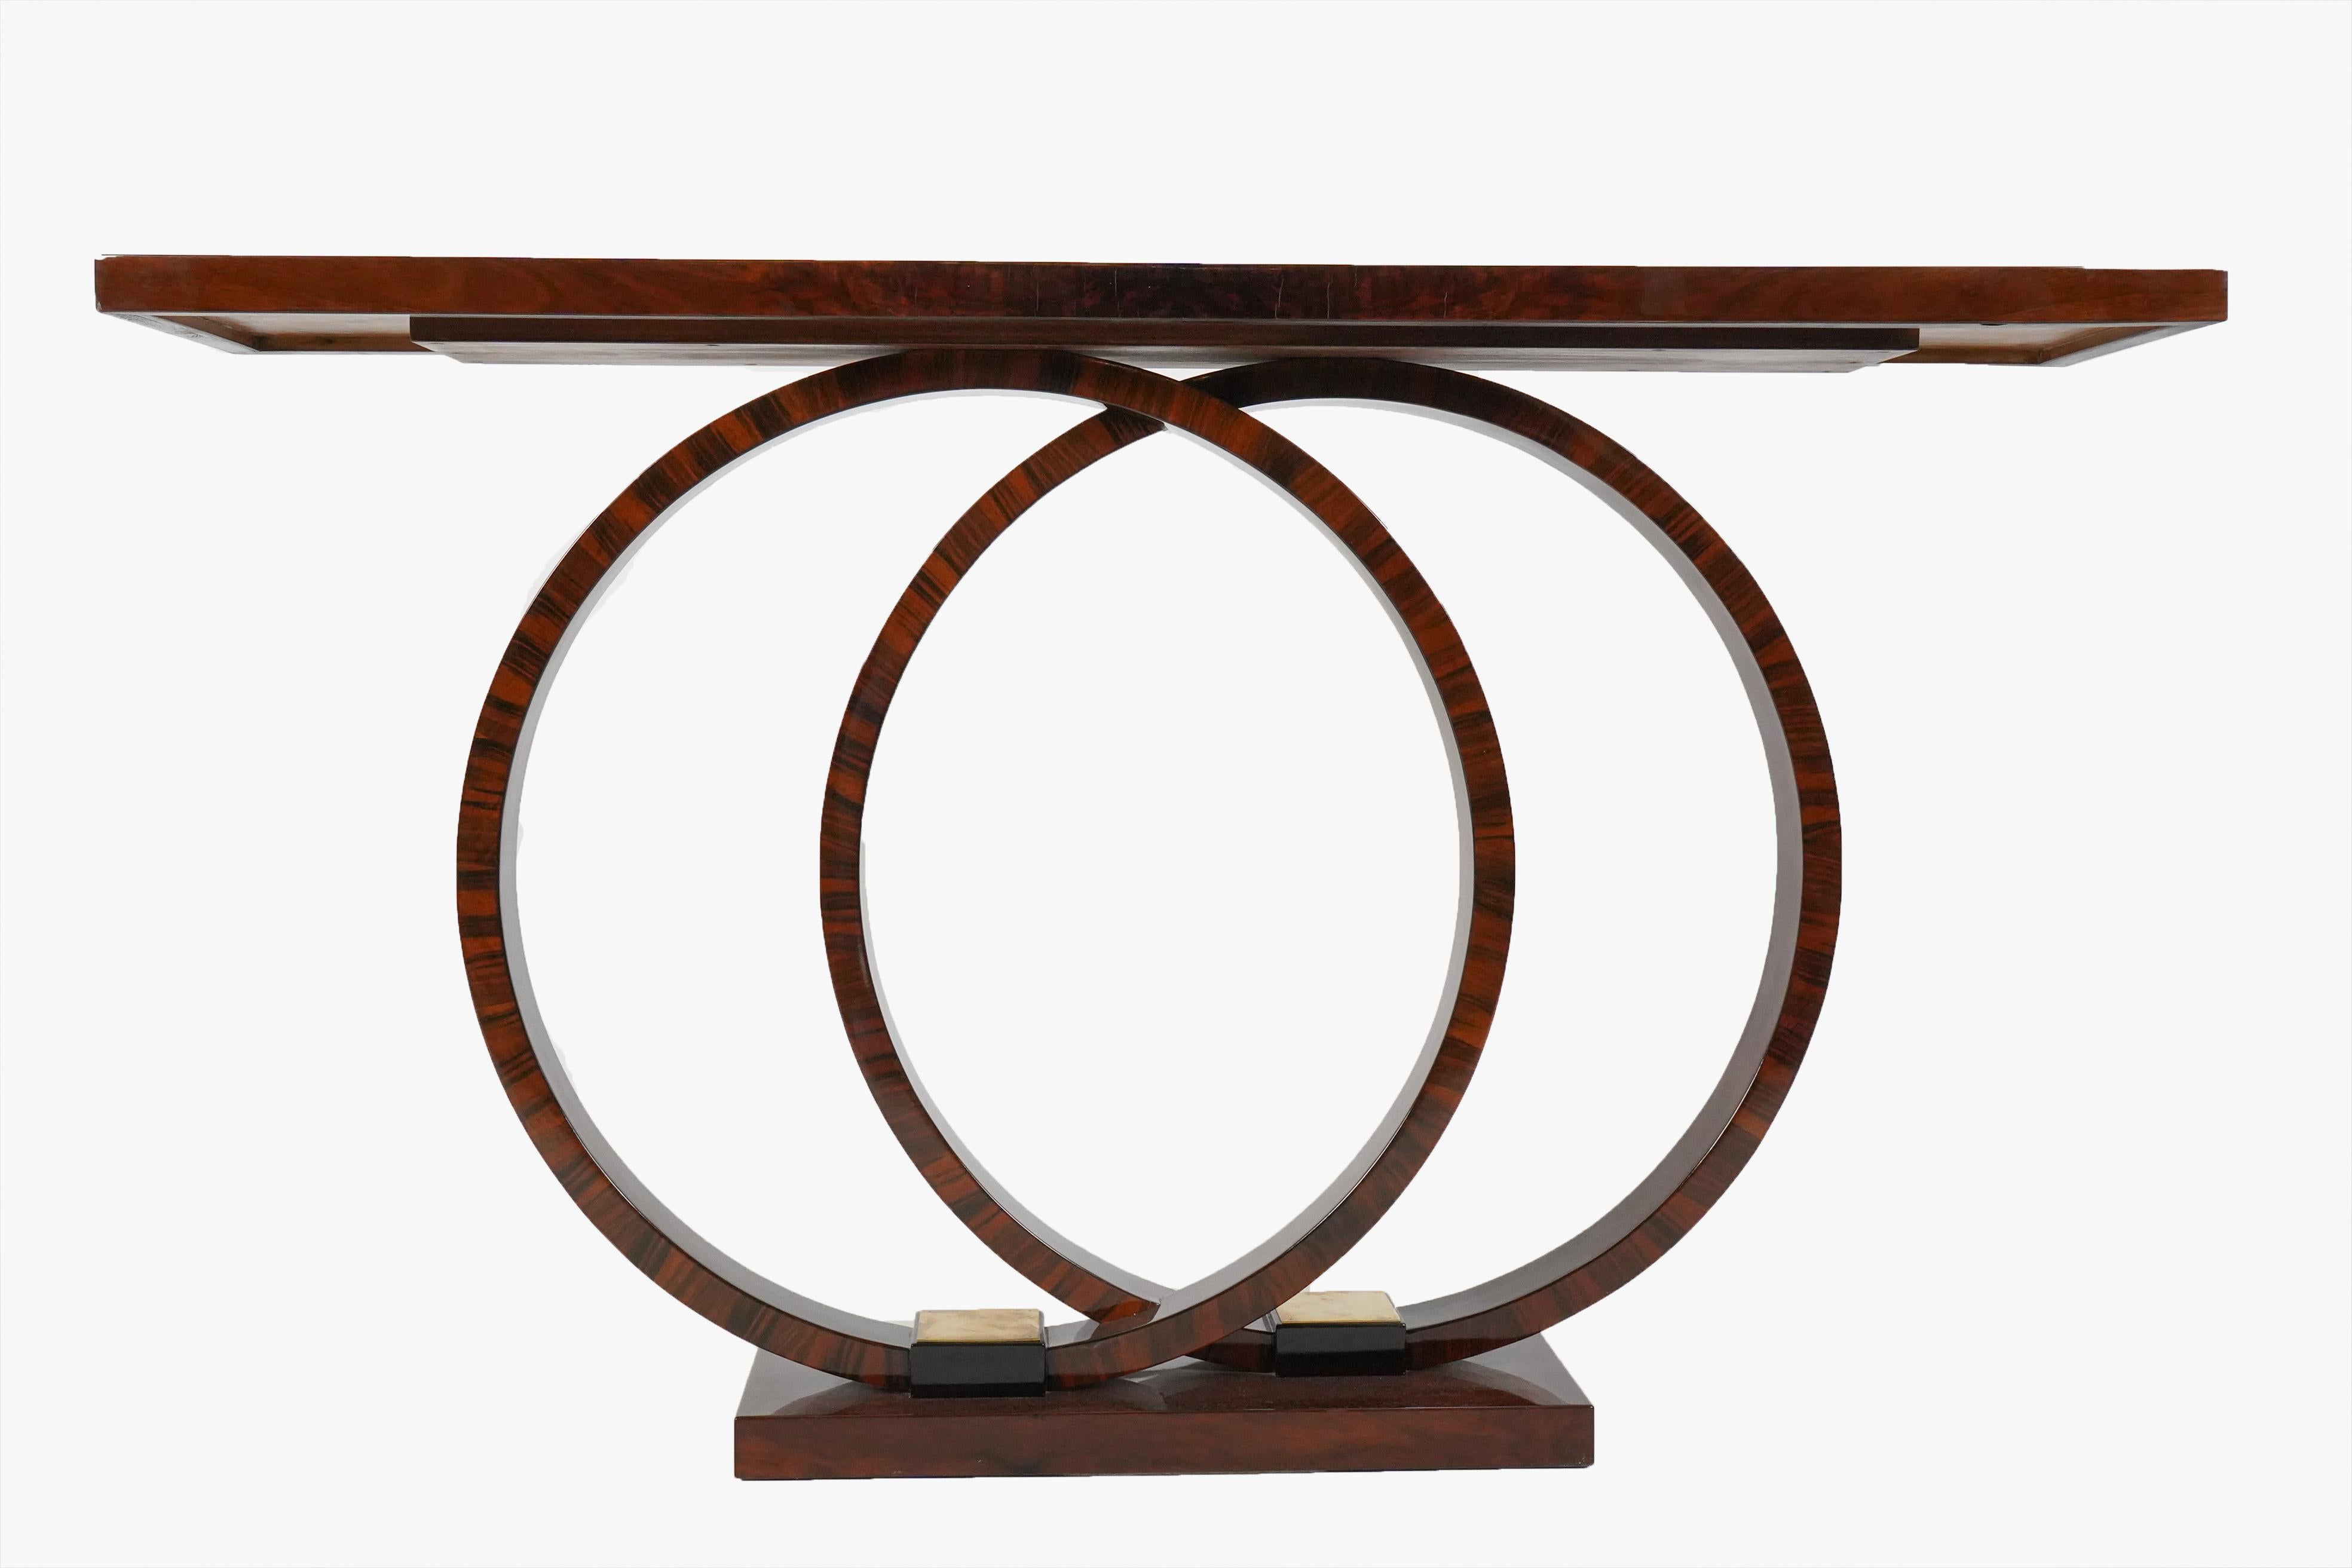 This stylish console features walnut veneers and nickel fittings. The top is finished in a very glossy French polish and rests atop two offset circular legs, also finished in walnut veneer. The piece is hard to categorize -not traditional enough for